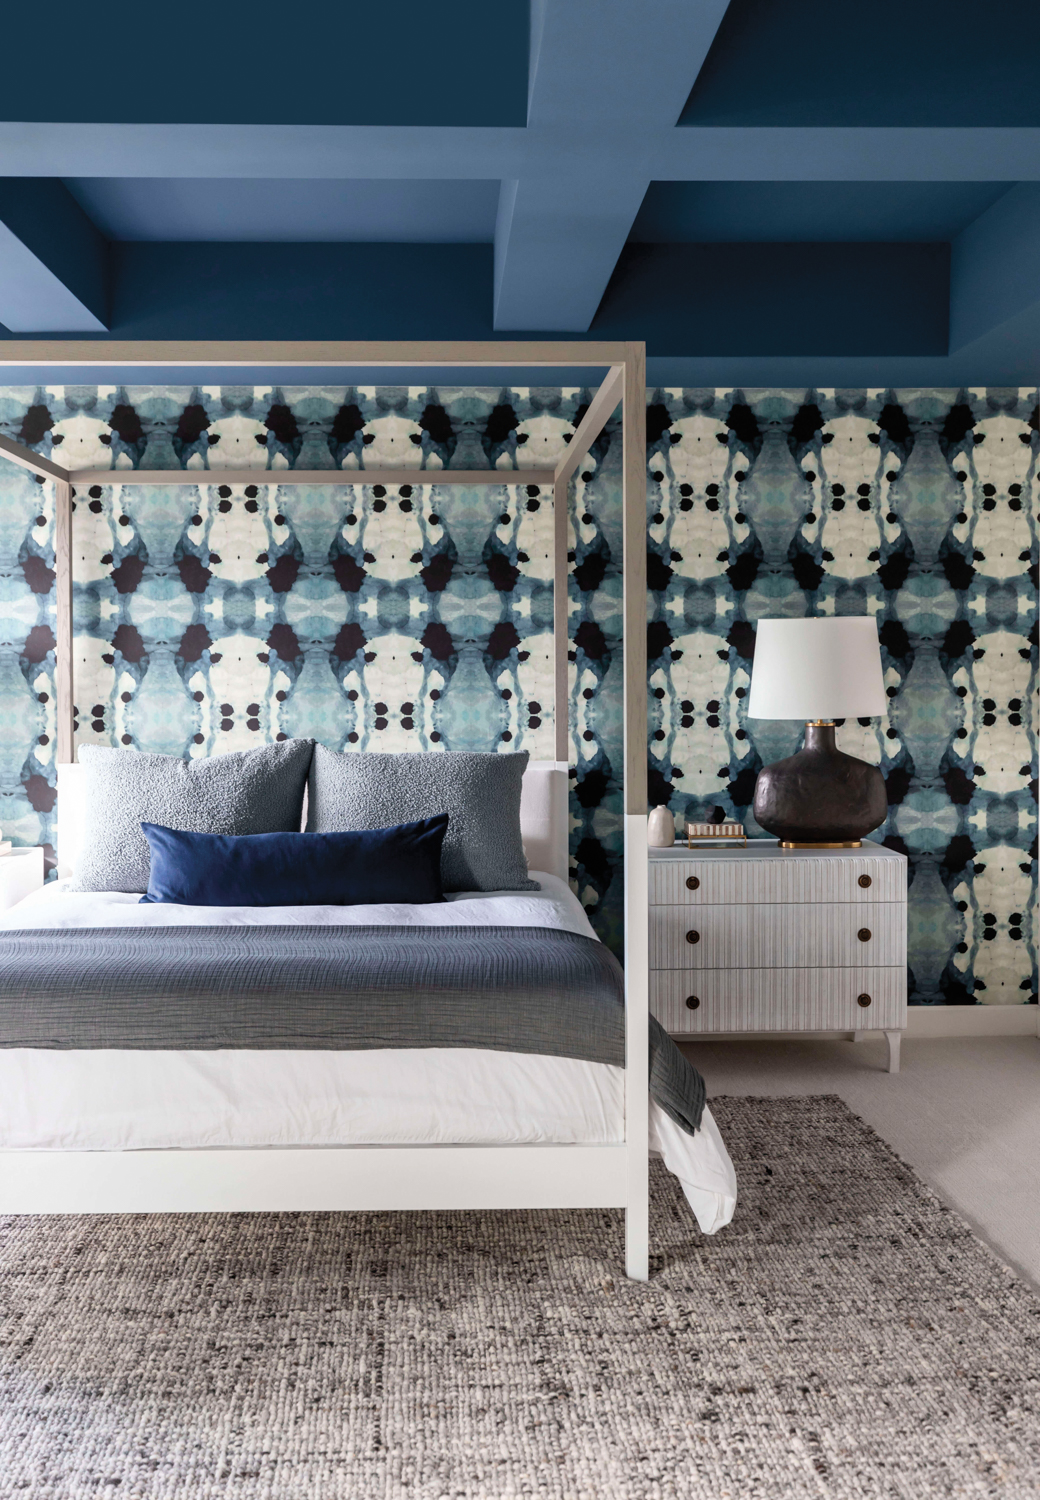 Bedroom with graphic blue-and-white wallpaper and coffered ceiling coated in blue paint